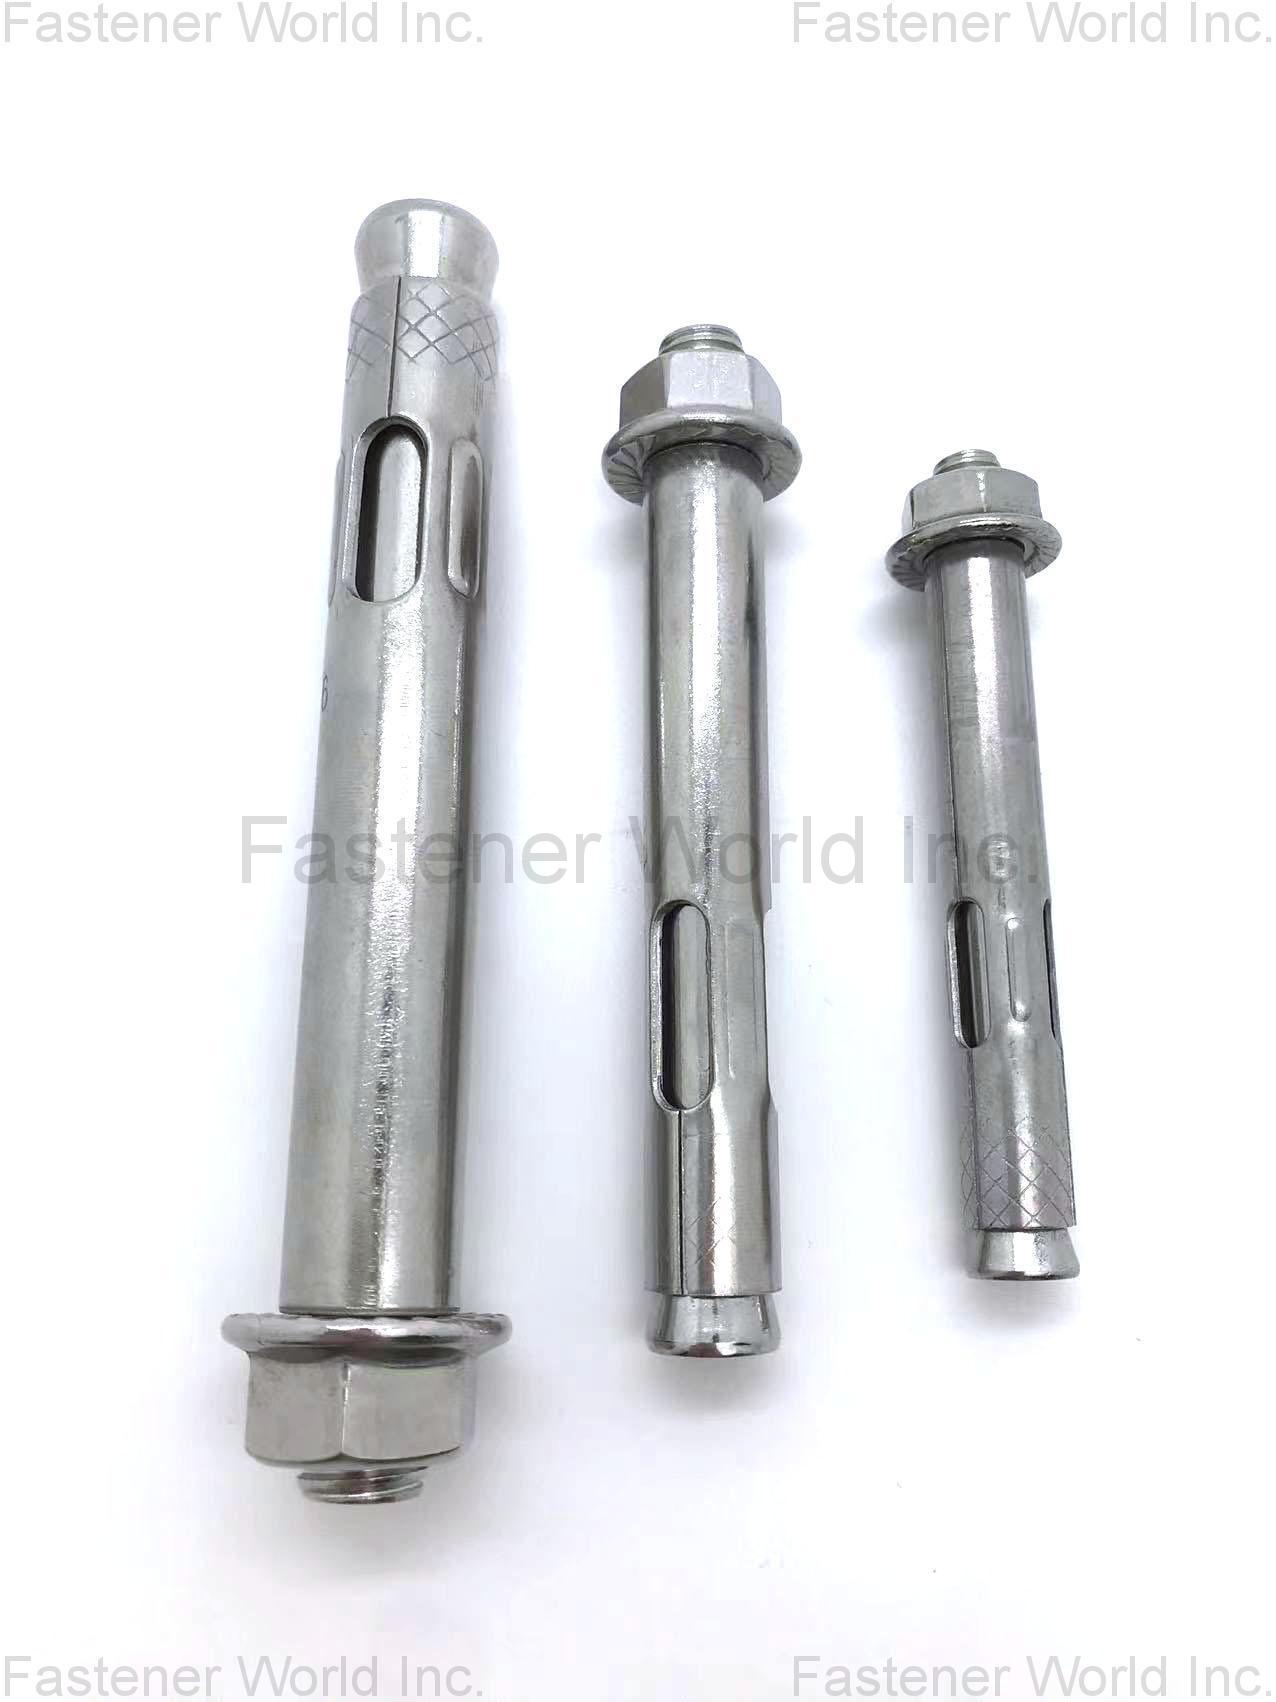 JIAXING AOKE HARDWARE TECHNOLOGY CO., LTD. , Stainless steel Sleeve Anchor with Hex Flange Nut